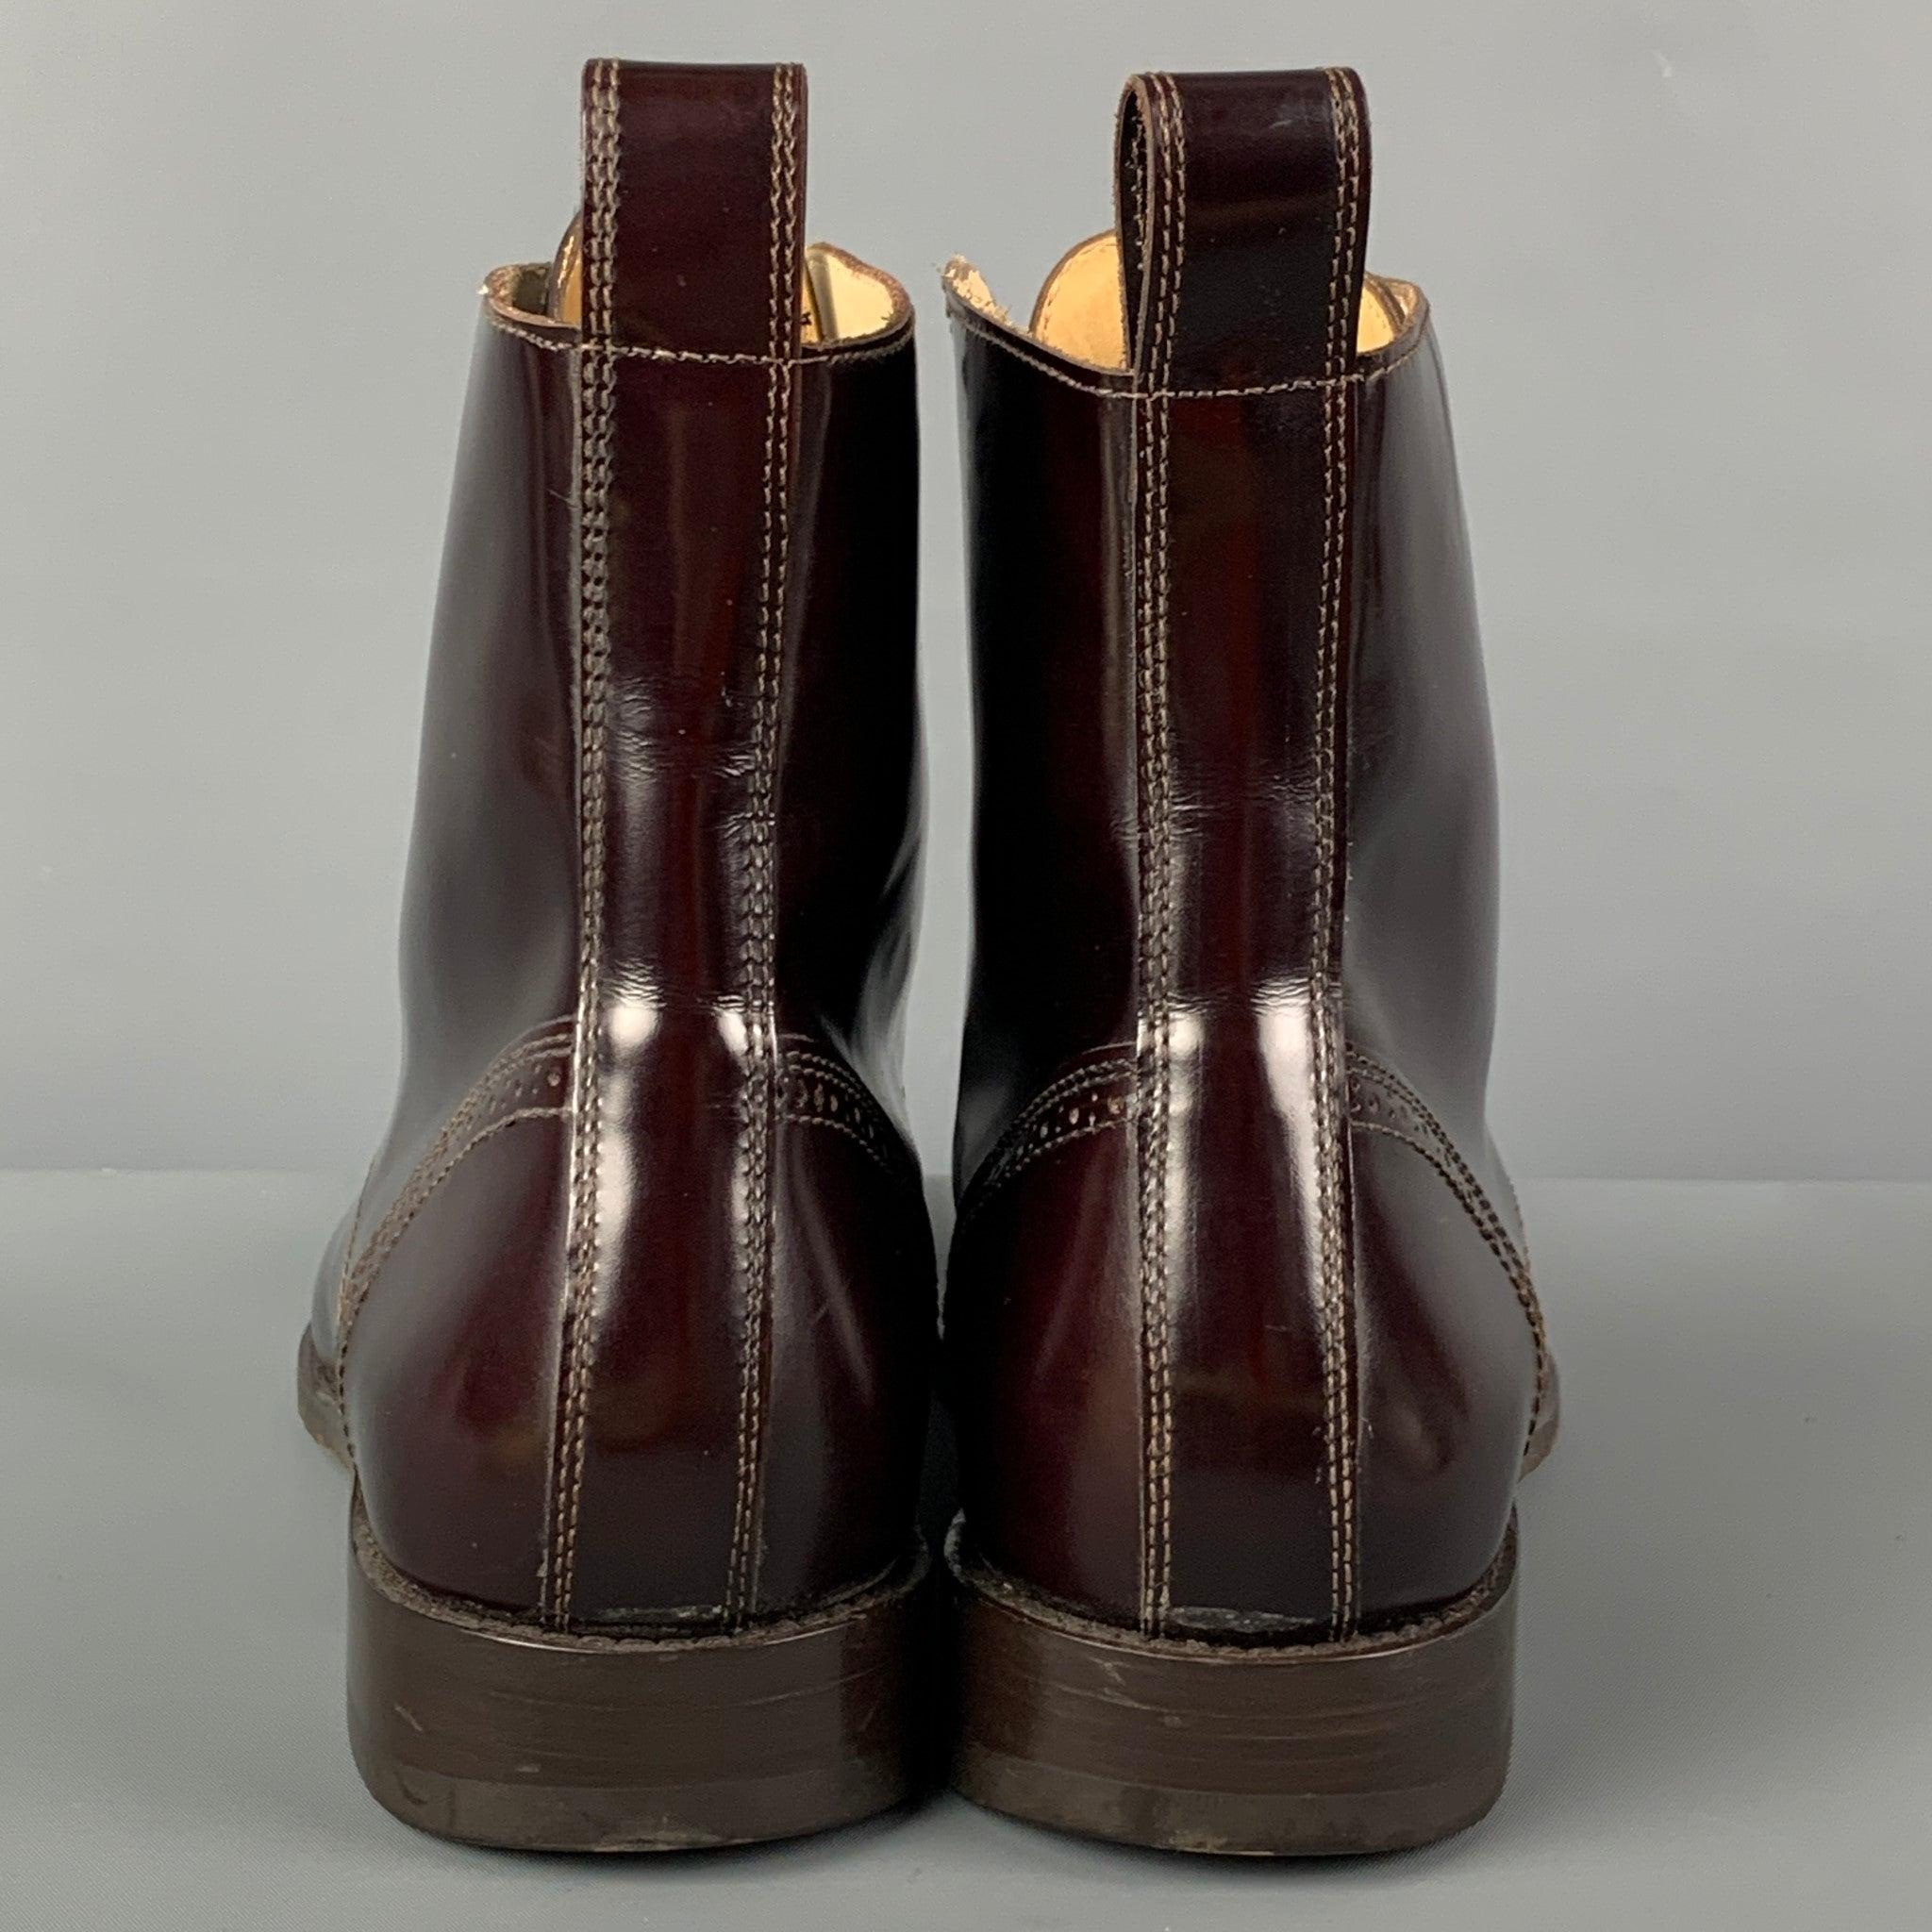 MARC JACOBS Size 9.5 Burgundy Perforated Leather Cap Toe Boots For Sale 1